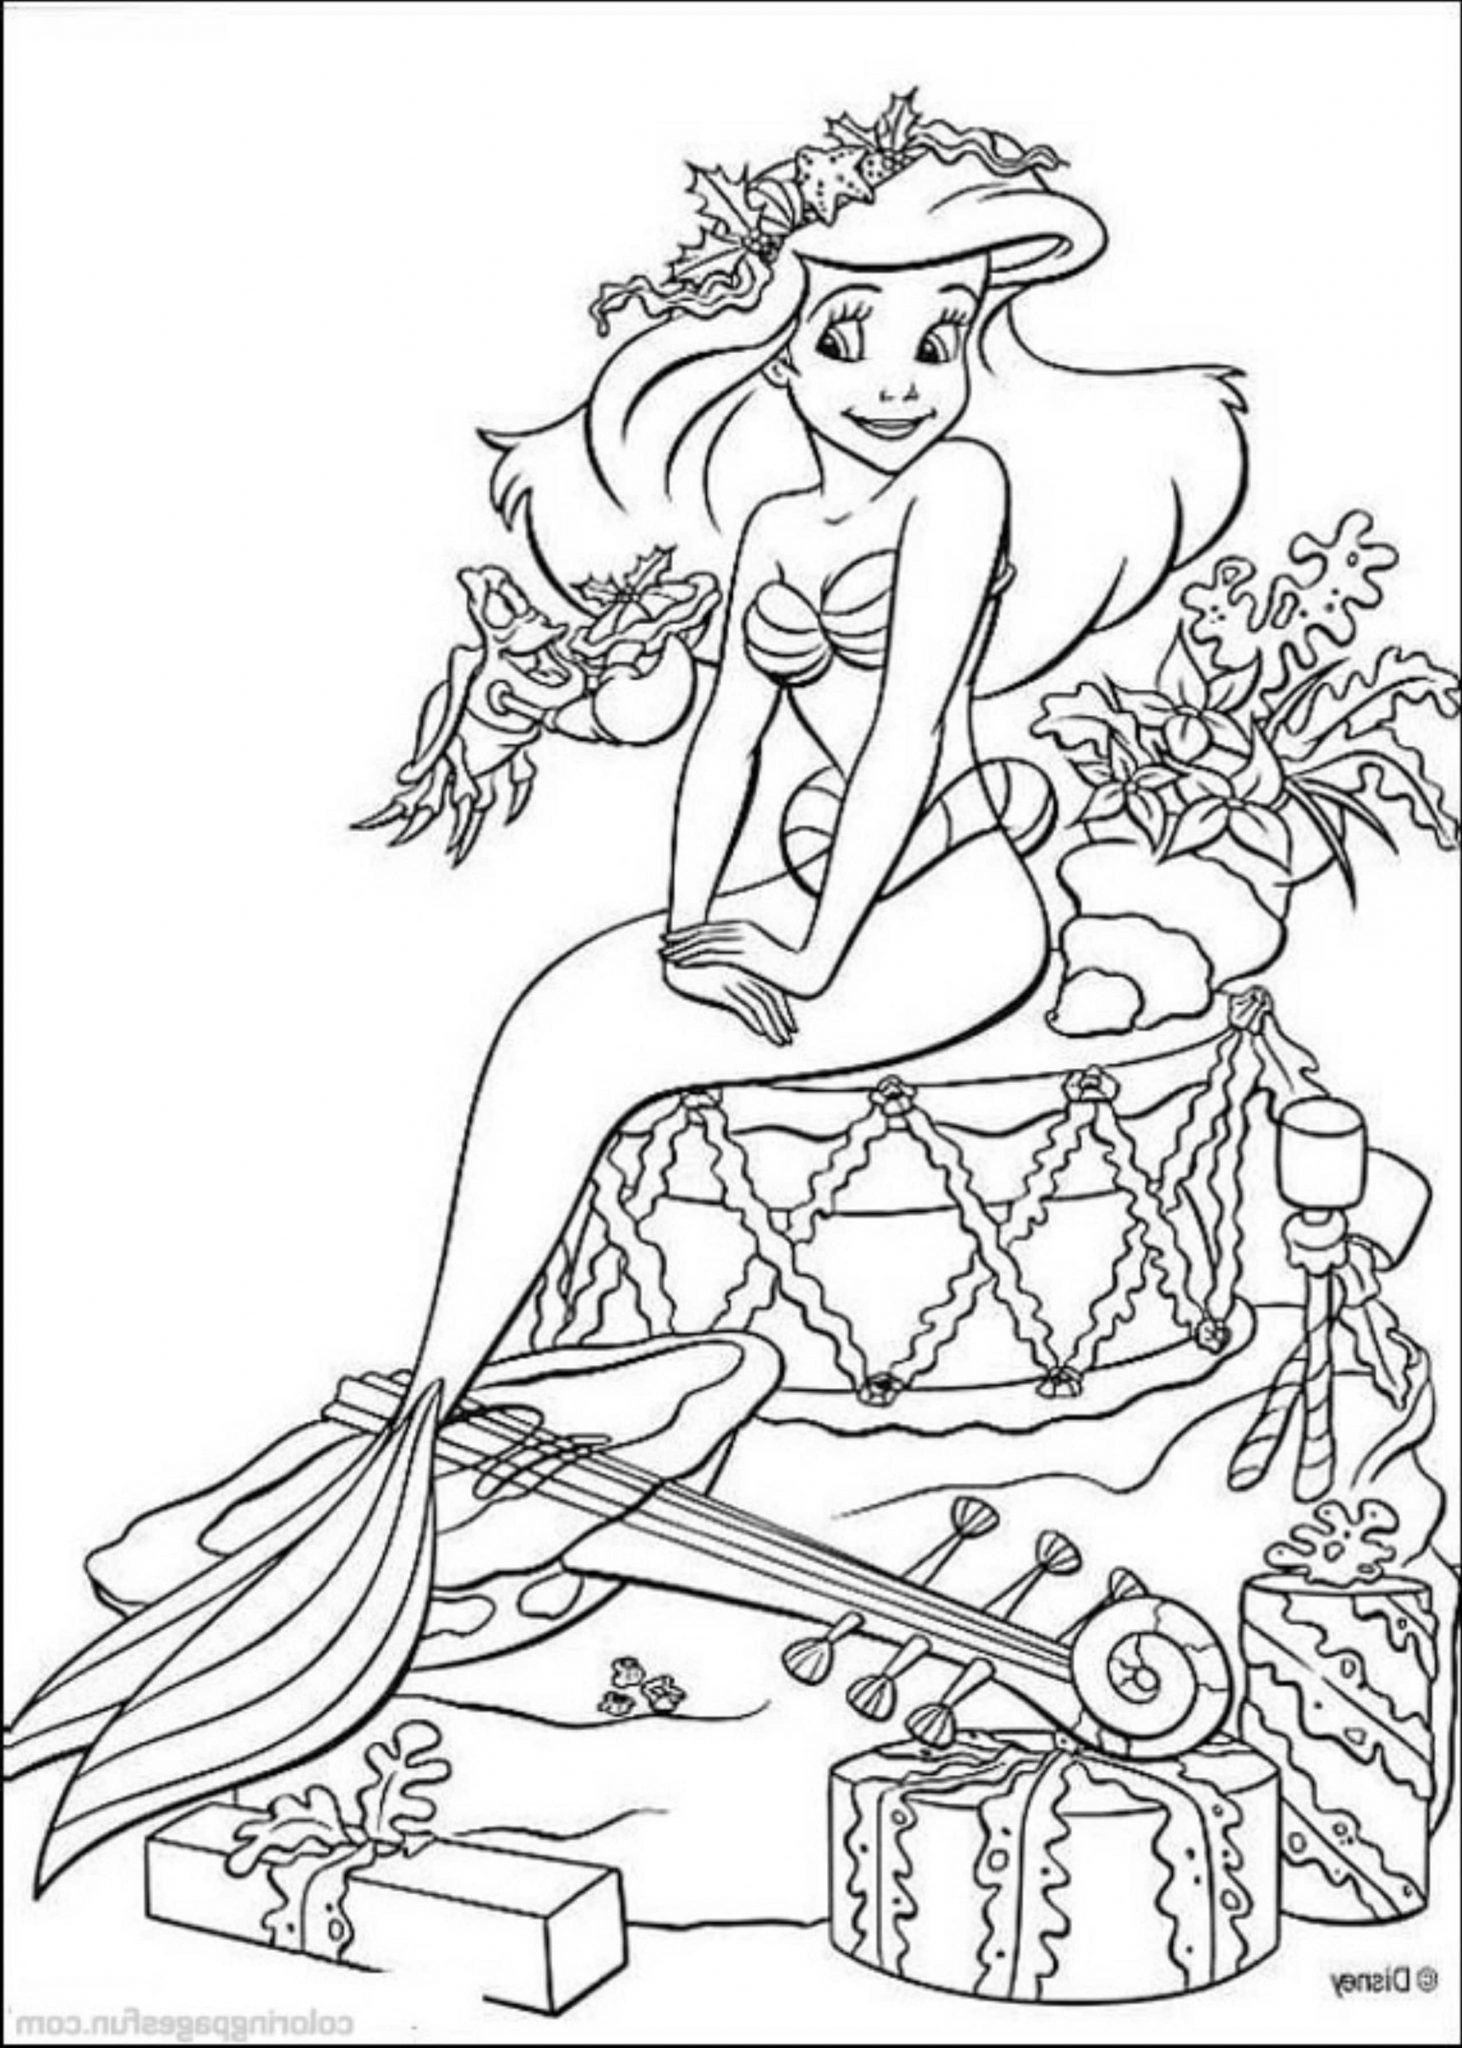 Mermaid Coloring Pages Free Printable
 Print & Download Find the Suitable Little Mermaid